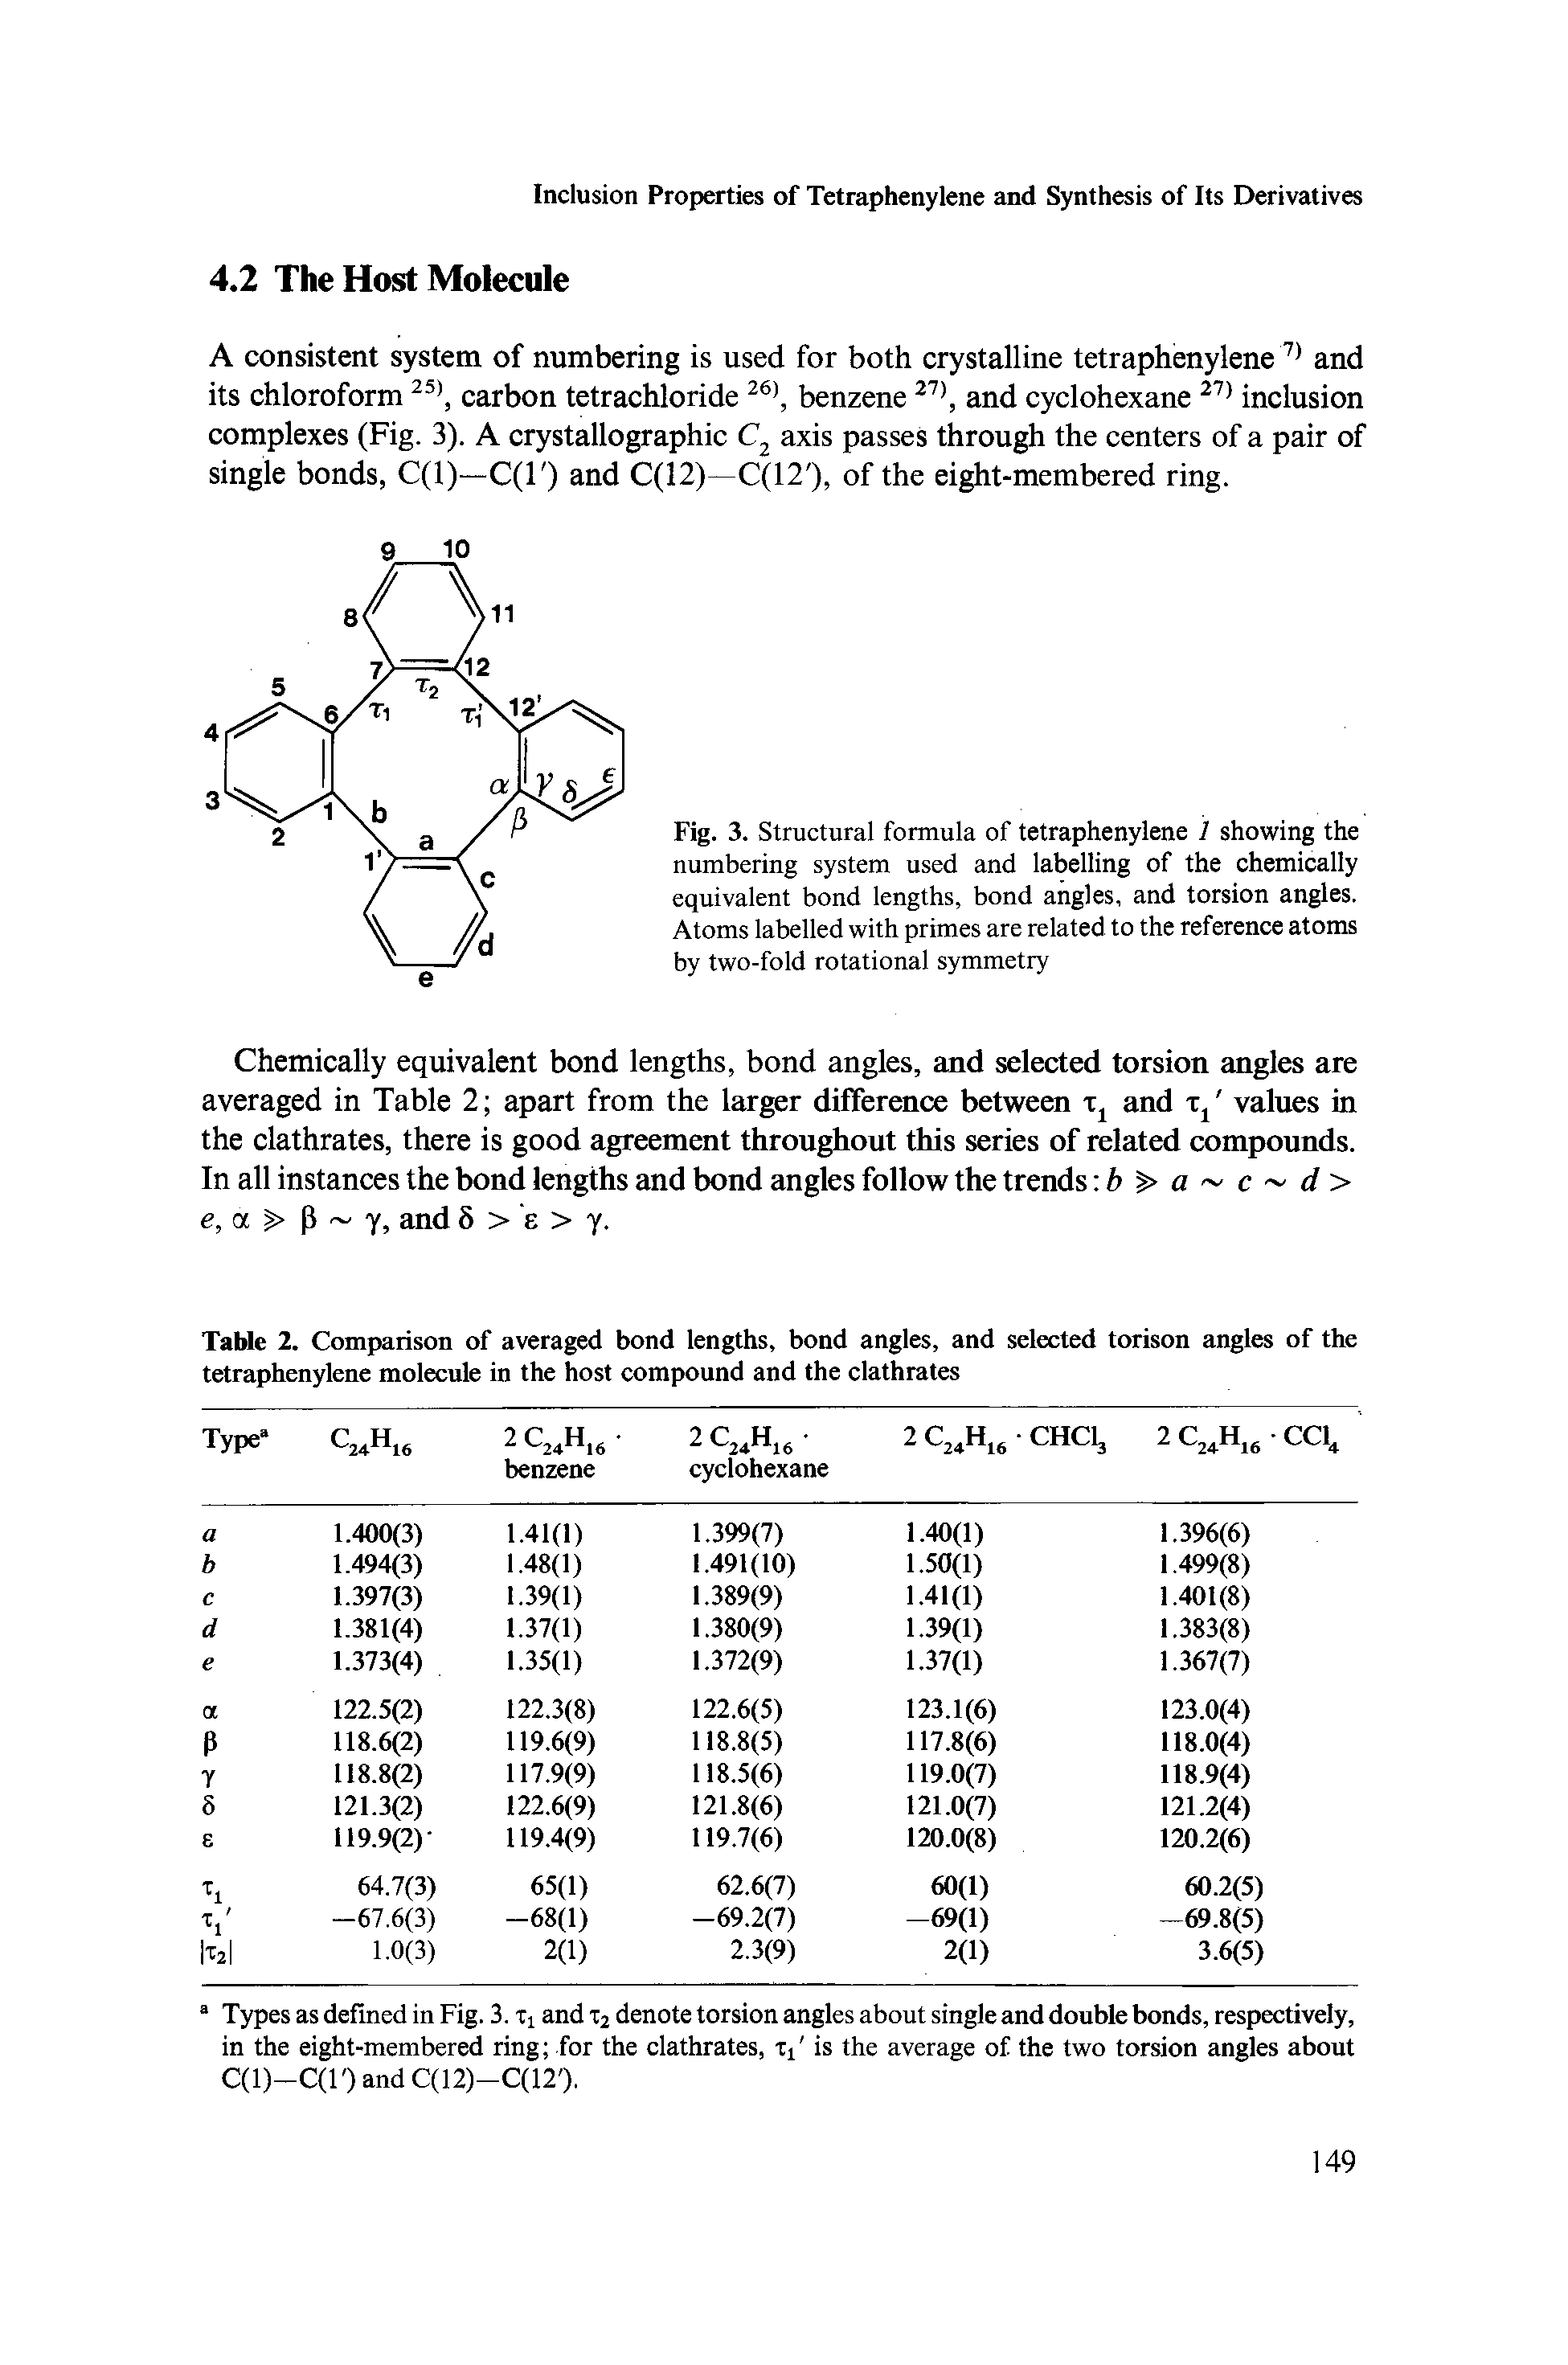 Fig. 3. Structural formula of tetraphenylene 1 showing the numbering system used and labelling of the chemically equivalent bond lengths, bond angles, and torsion angles. Atoms labelled with primes are related to the reference atoms by two-fold rotational symmetry...